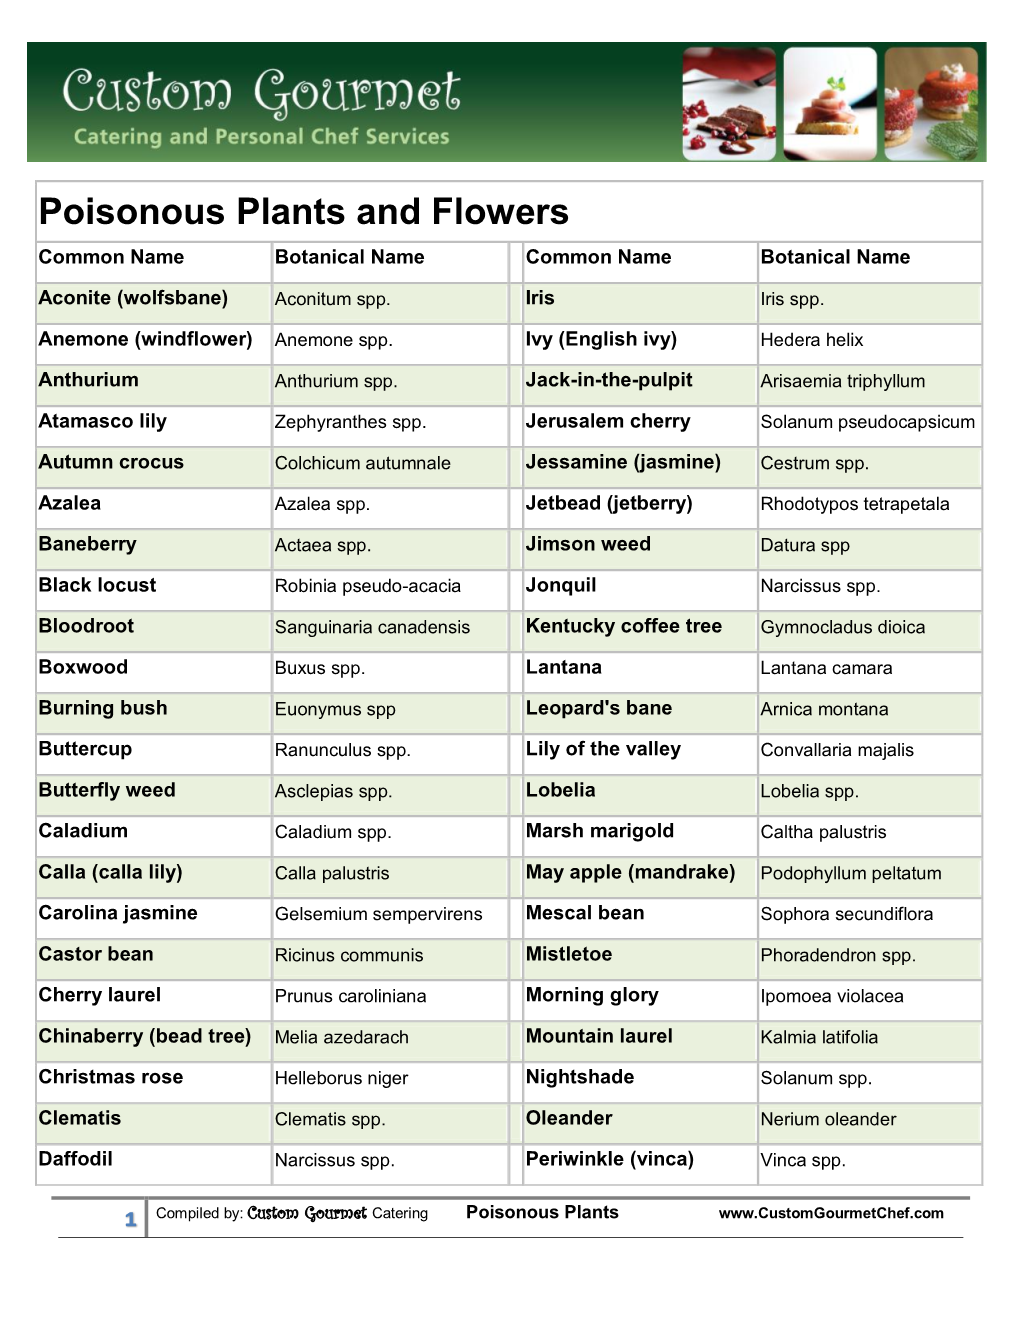 Poisonous Plants and Flowers Common Name Botanical Name Common Name Botanical Name